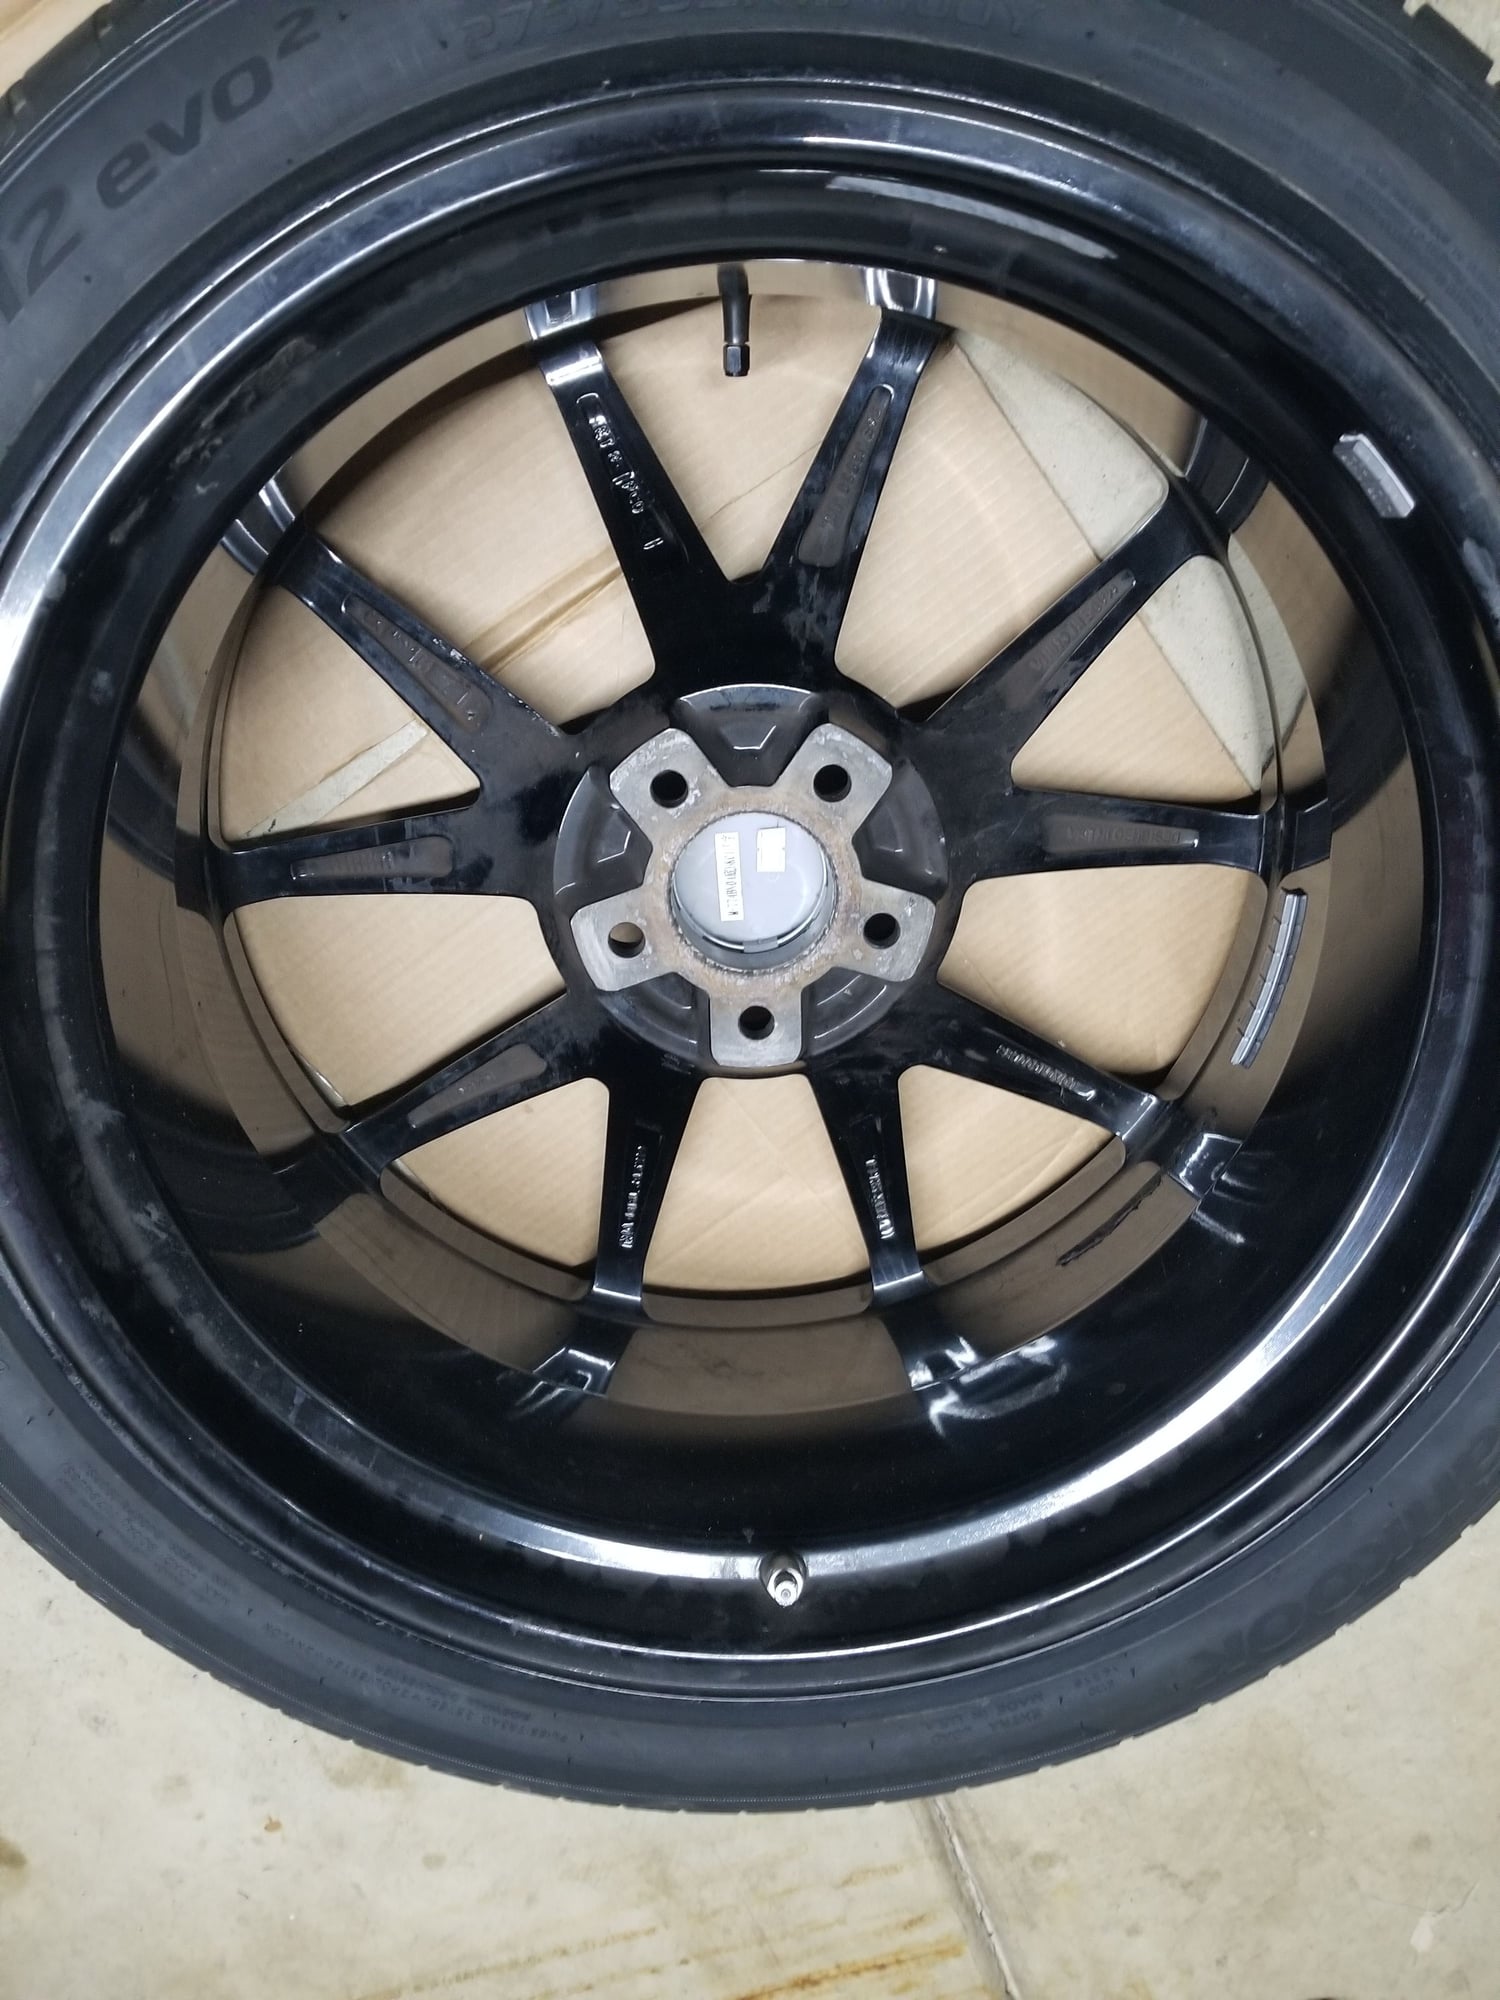 Wheels and Tires/Axles - 4 Staggered 19" Wheel and Tire Set From C63 Amg Mercedes - Used - 2007 to 2015 Mercedes-Benz C63 AMG - Schaumburg, IL 60193, United States